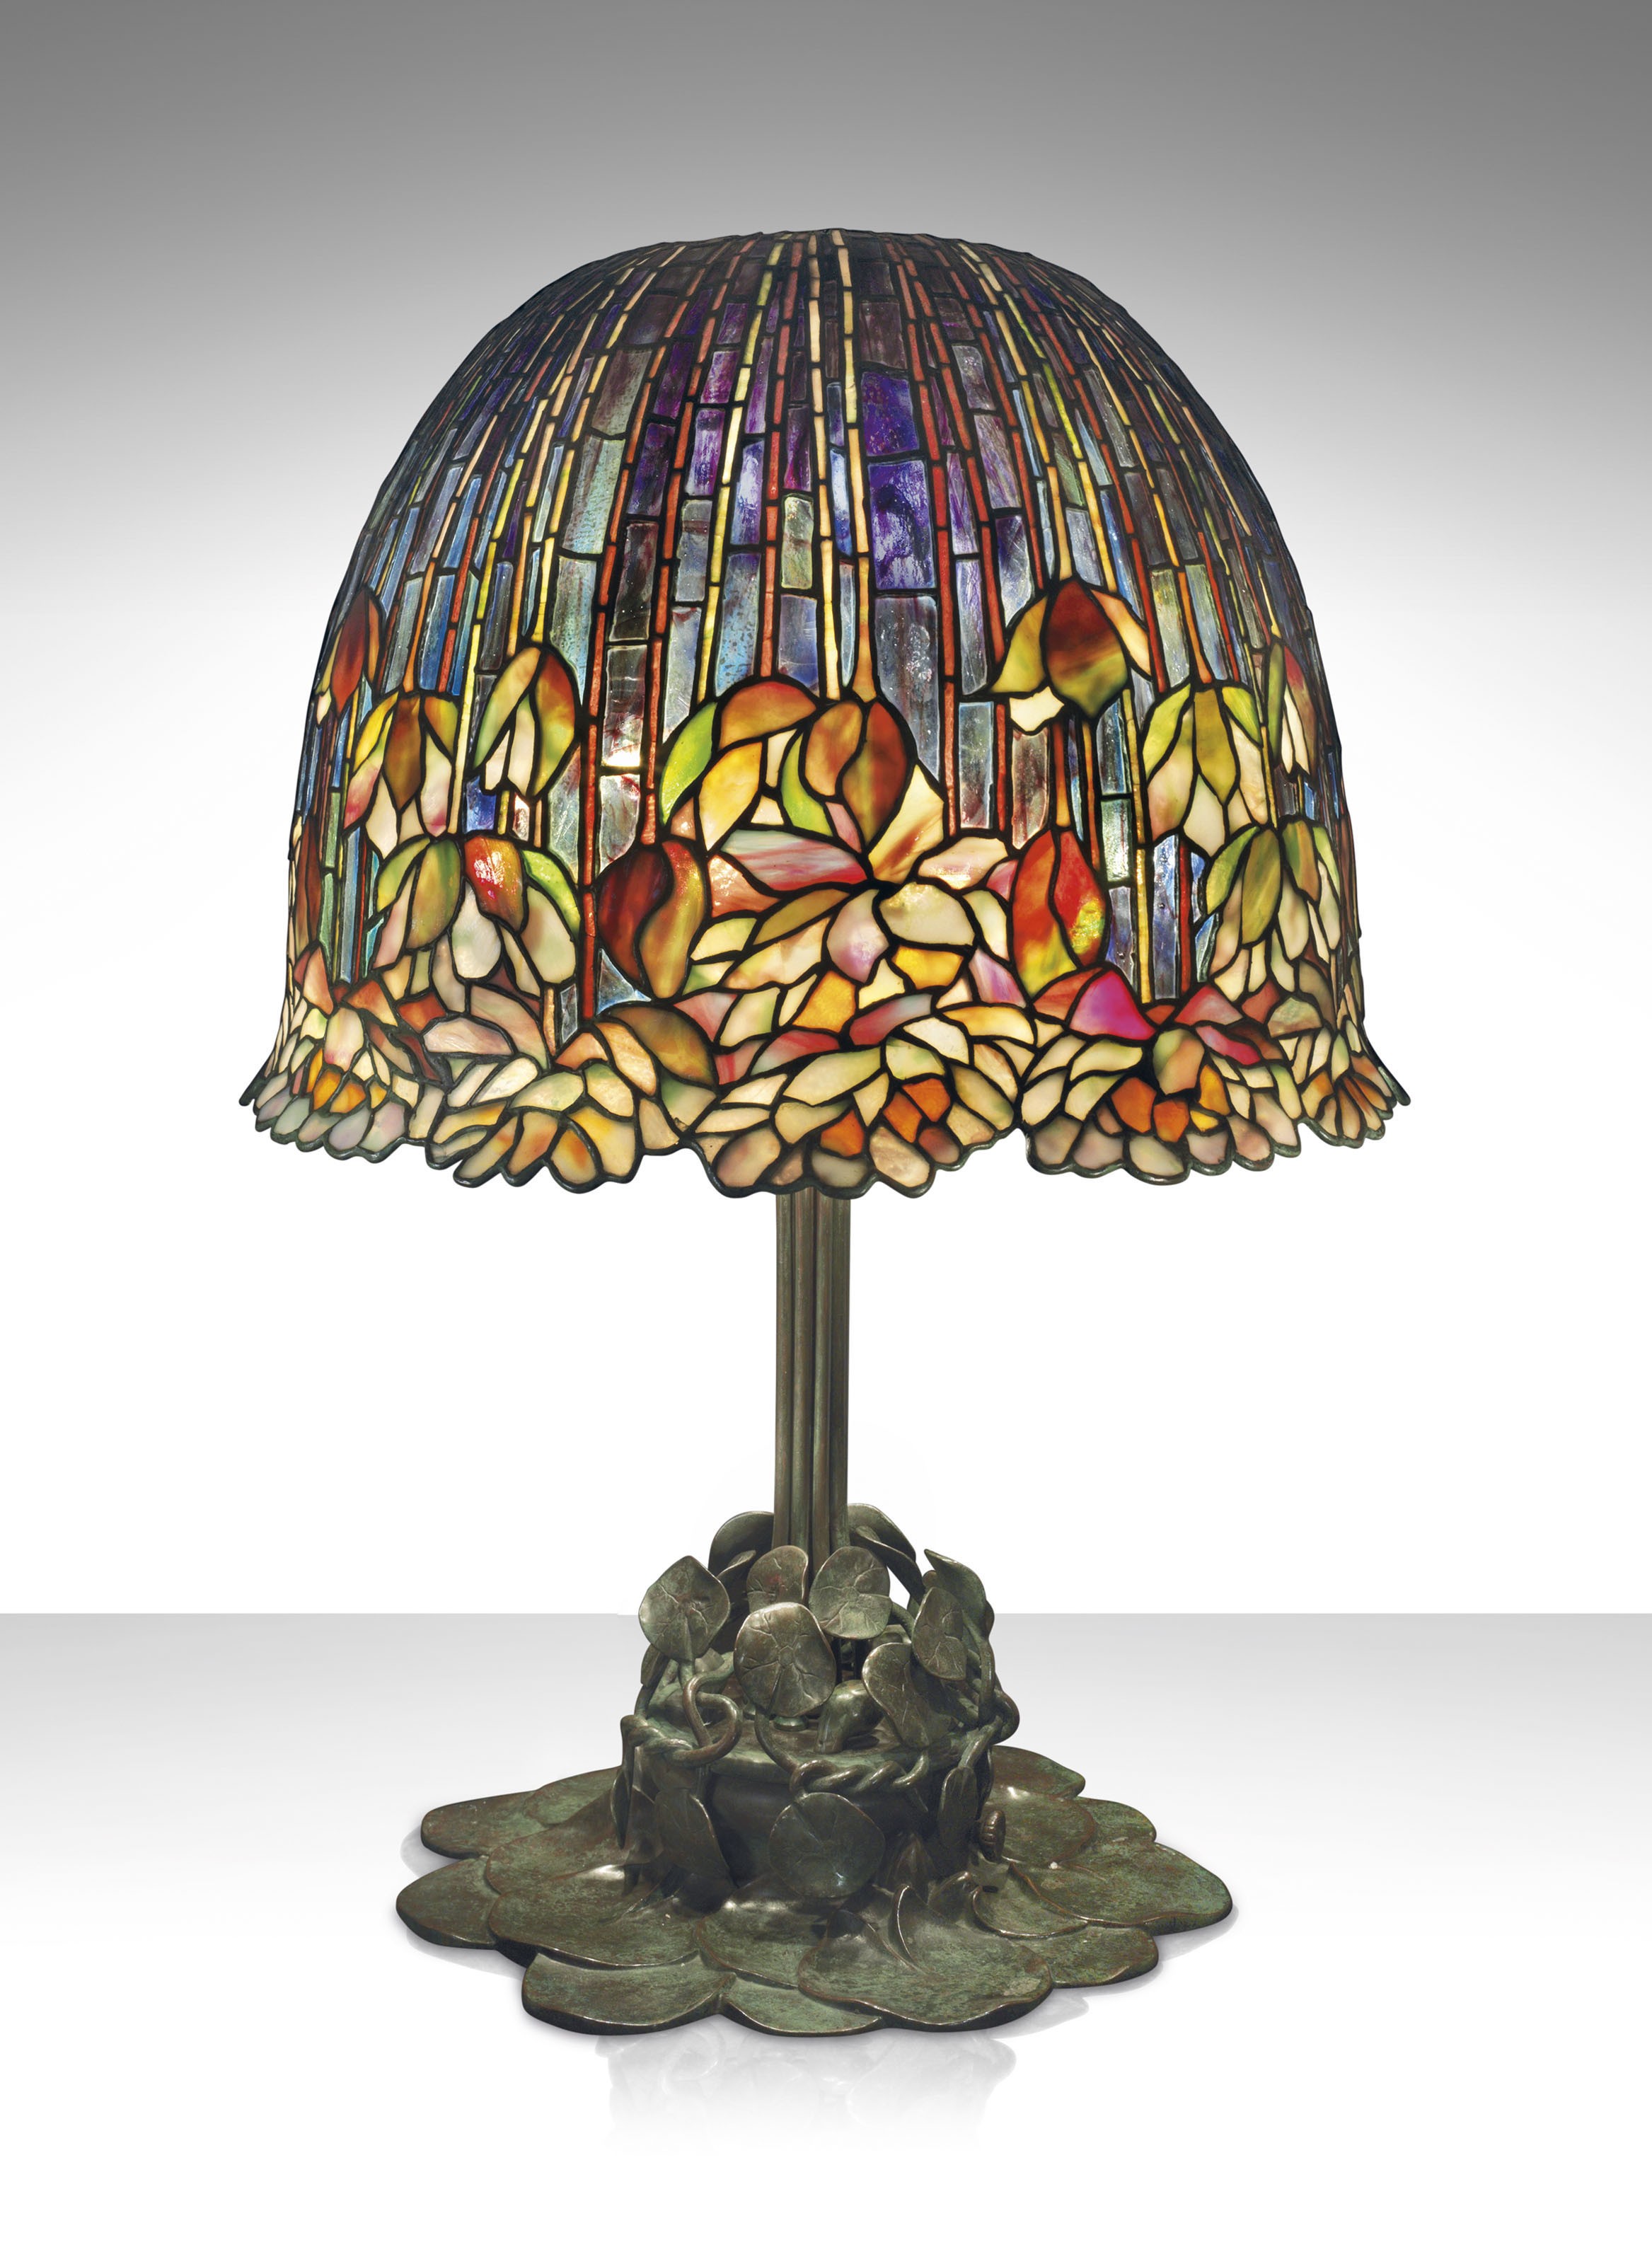 Tiffany studios a rare and important pond lily table